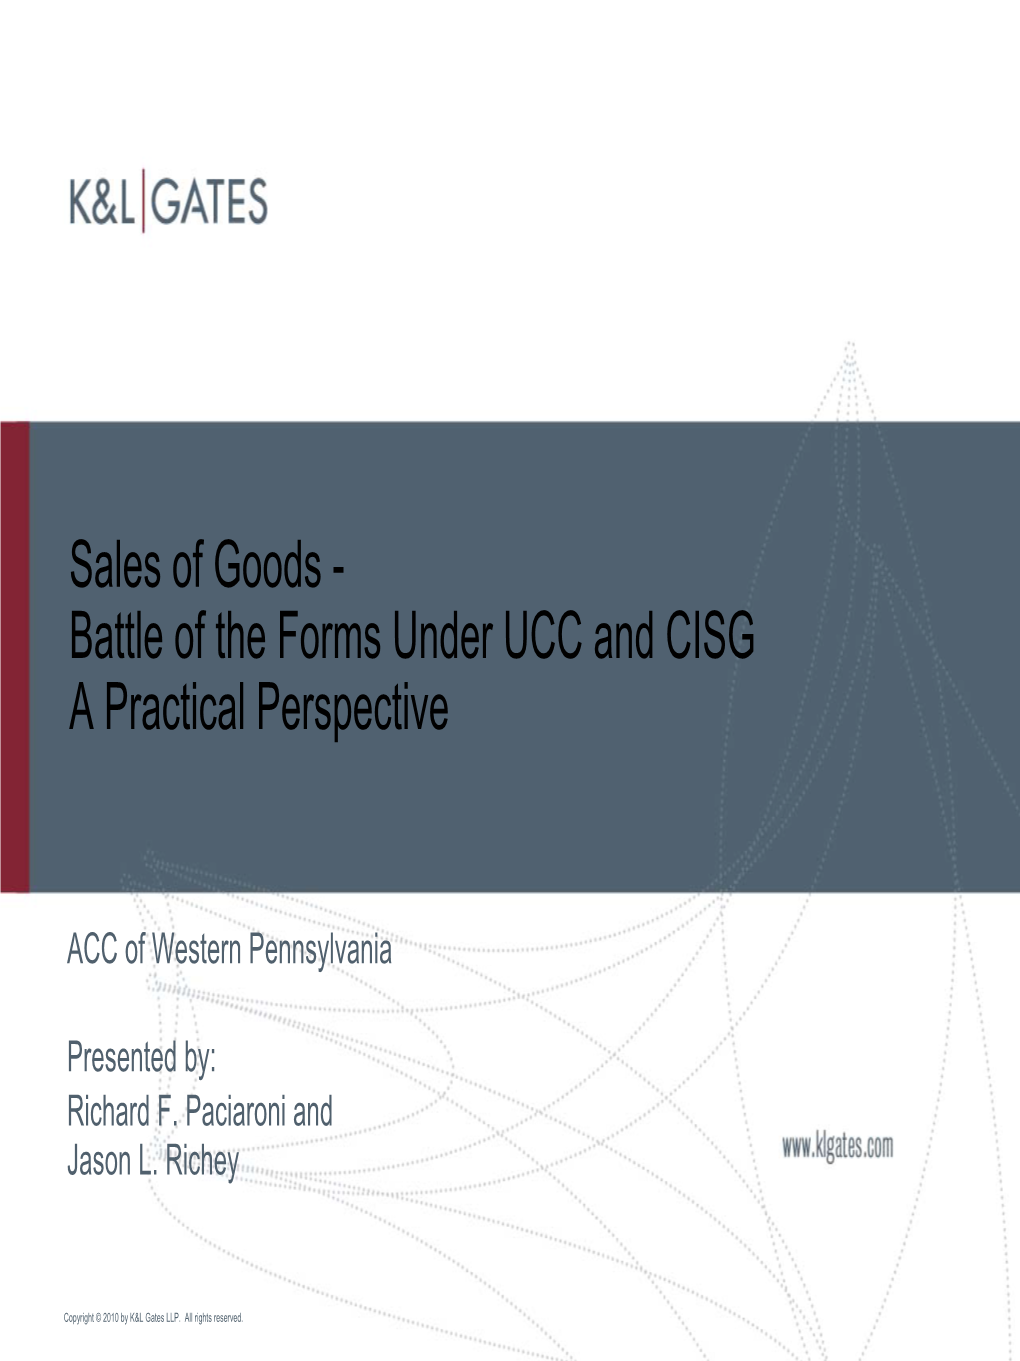 Sales of Goods - Battle of the Forms Under UCC and CISG a Practical Perspective